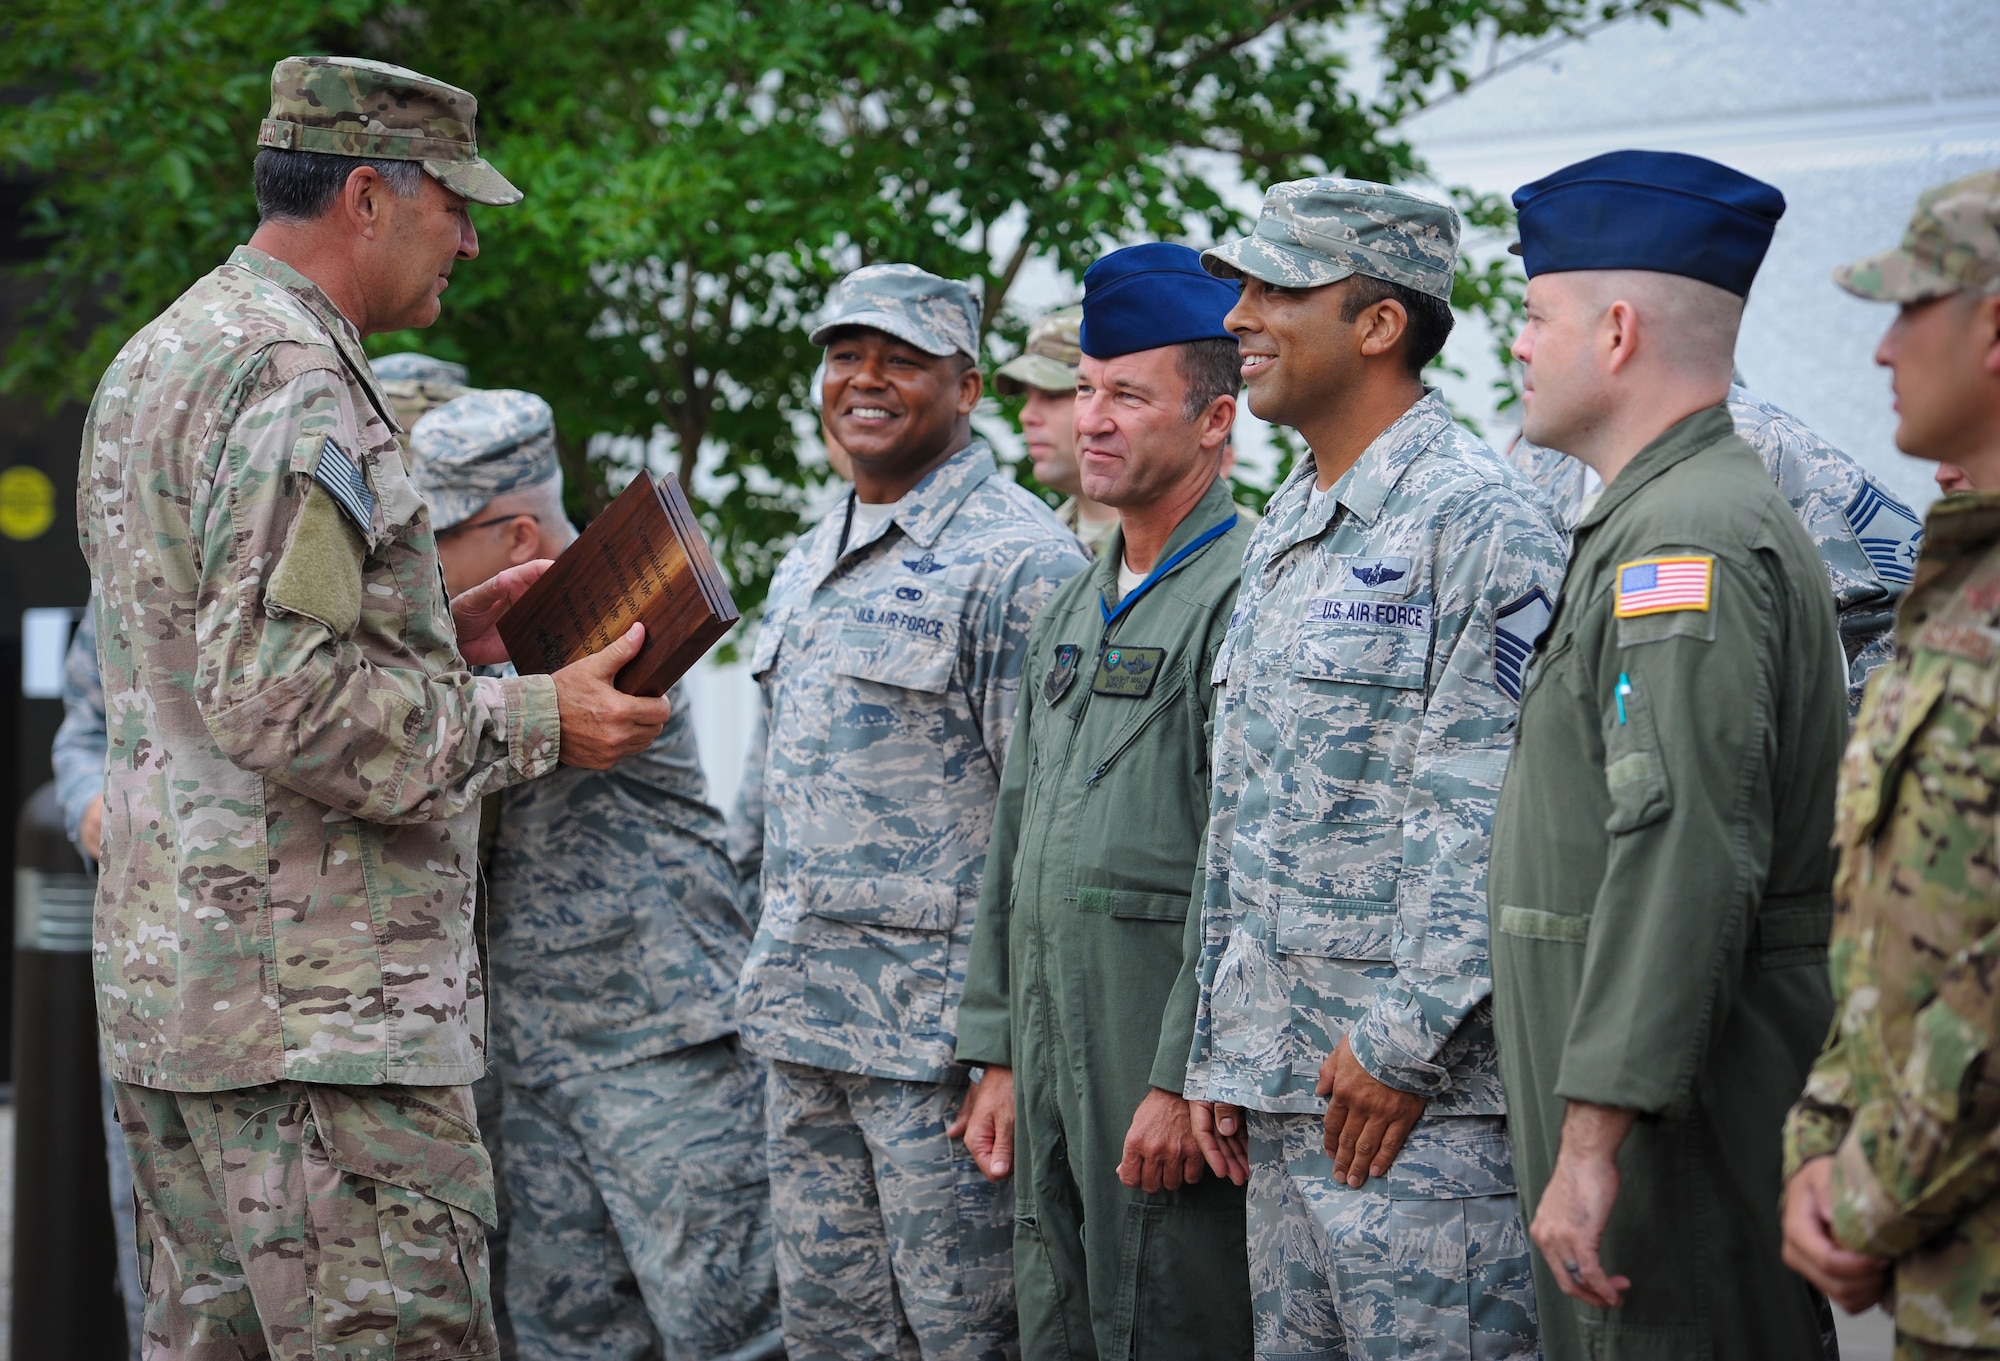 Lt. Gen. Brad Heithold, commander of Air Force Special Operations Command, speaks with Airmen after receiving an Order of the Sword invitation at Hurlburt Field, Fla., May 2, 2016. Heithold will be the 10th person to receive the AFSOC Order of the Sword. The general is scheduled to transfer to the Pentagon in June. (U.S. Air Force photo by Senior Airman Meagan Schutter)